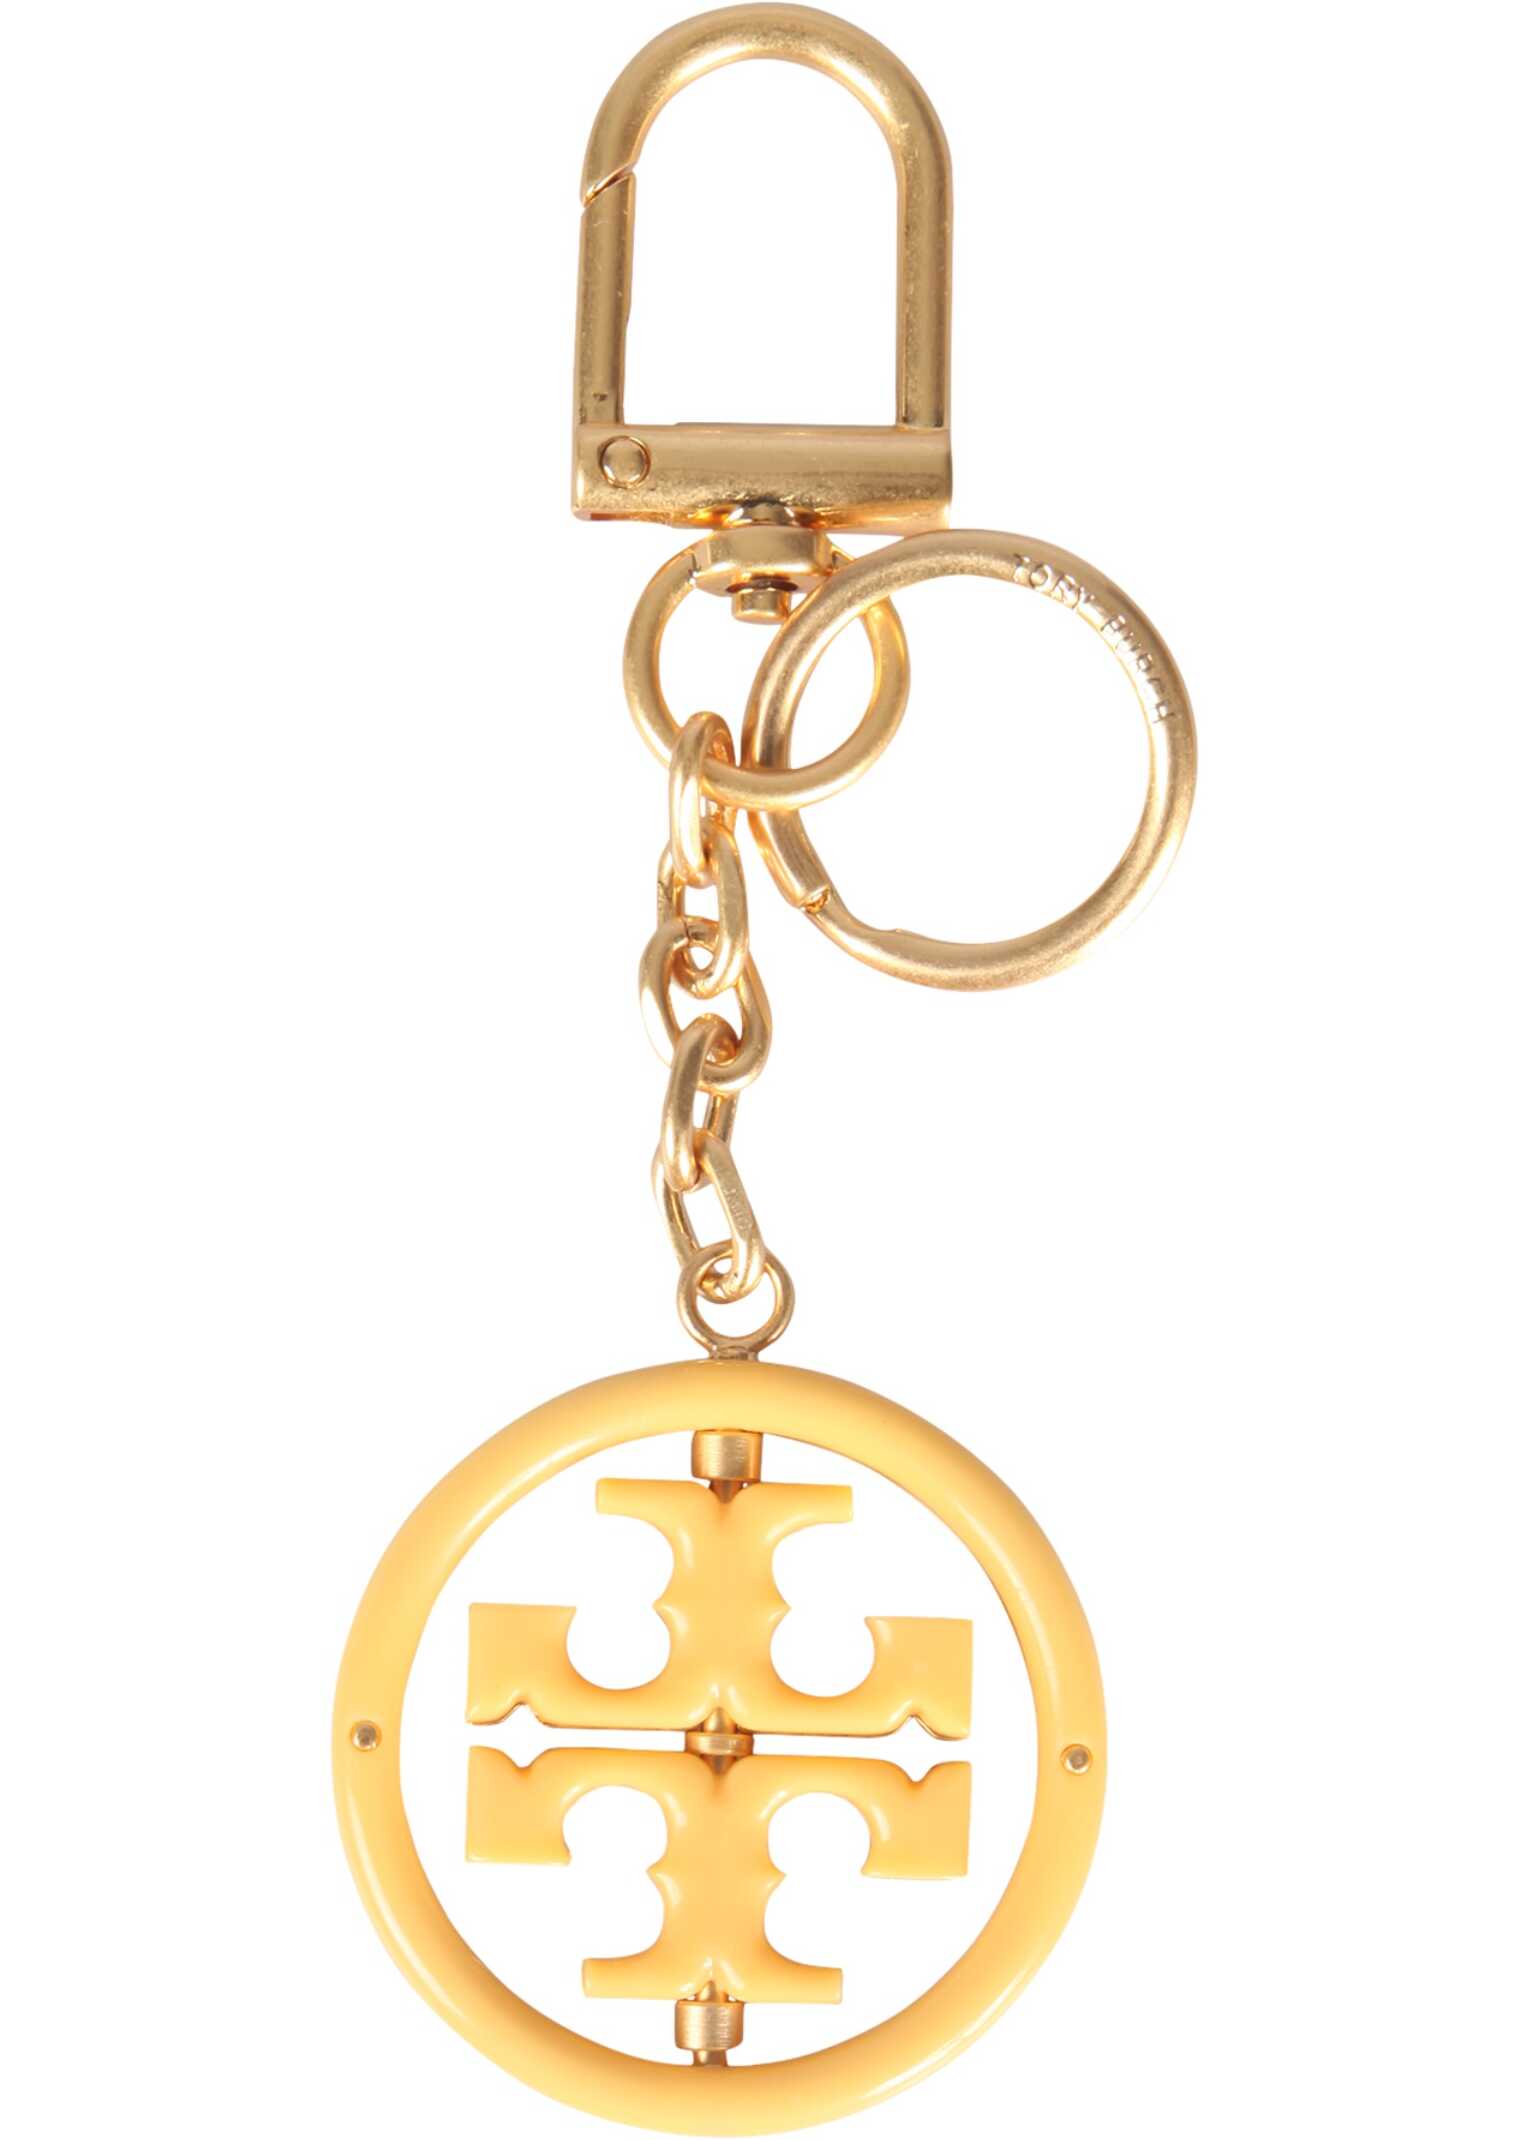 Tory Burch Key Ring With Logo GOLD image